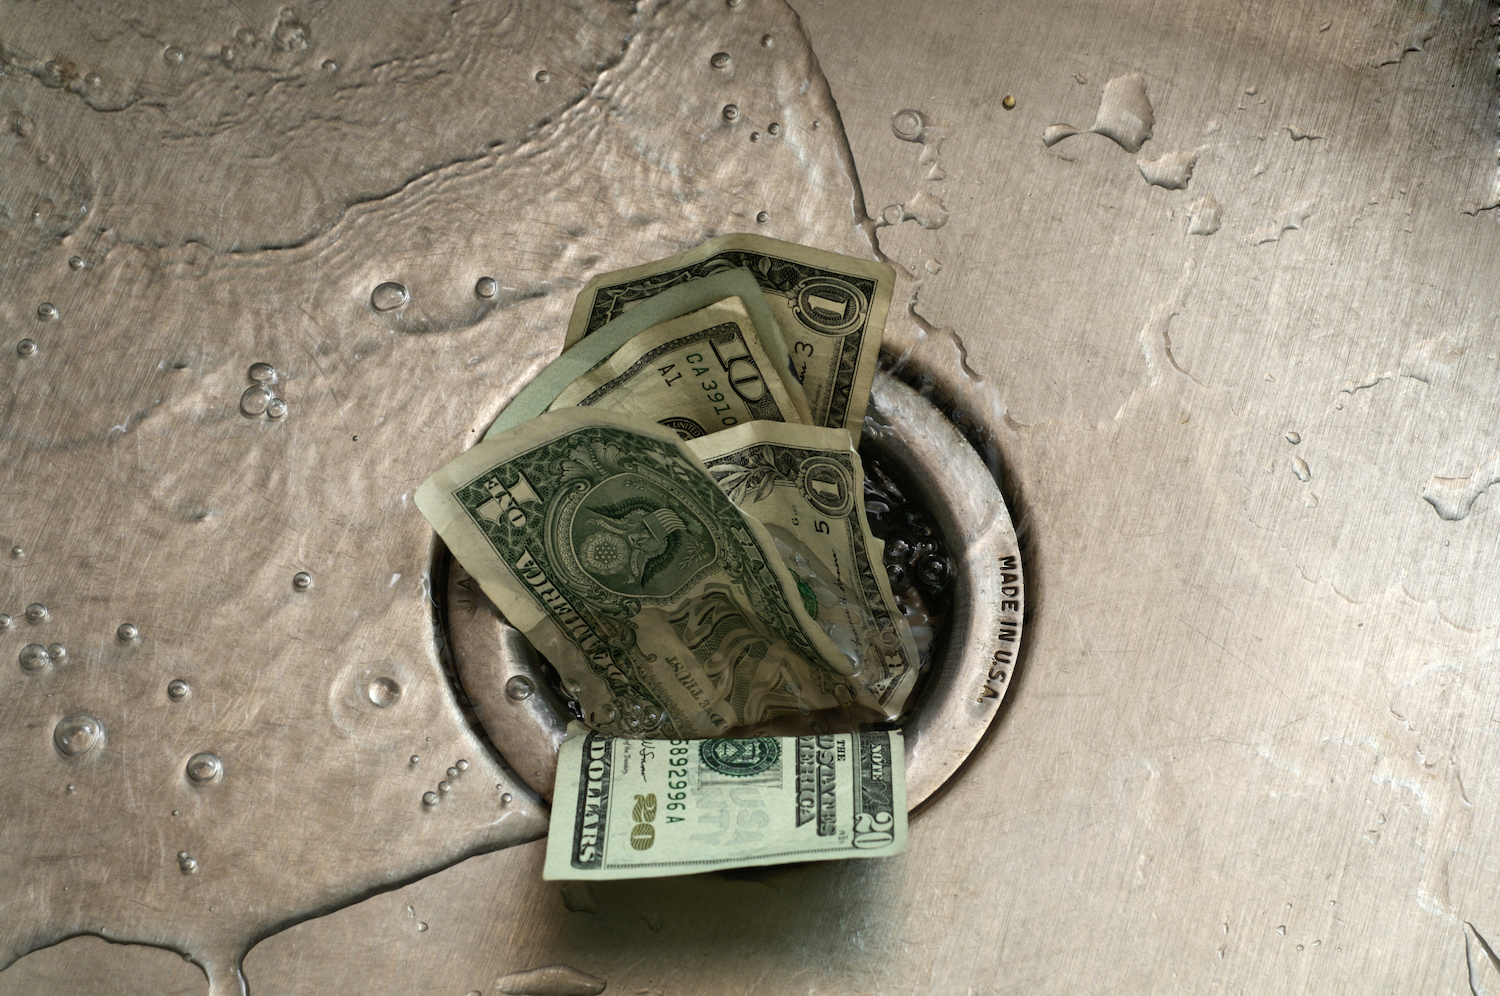 American bills pushed down the drain of a wet sink